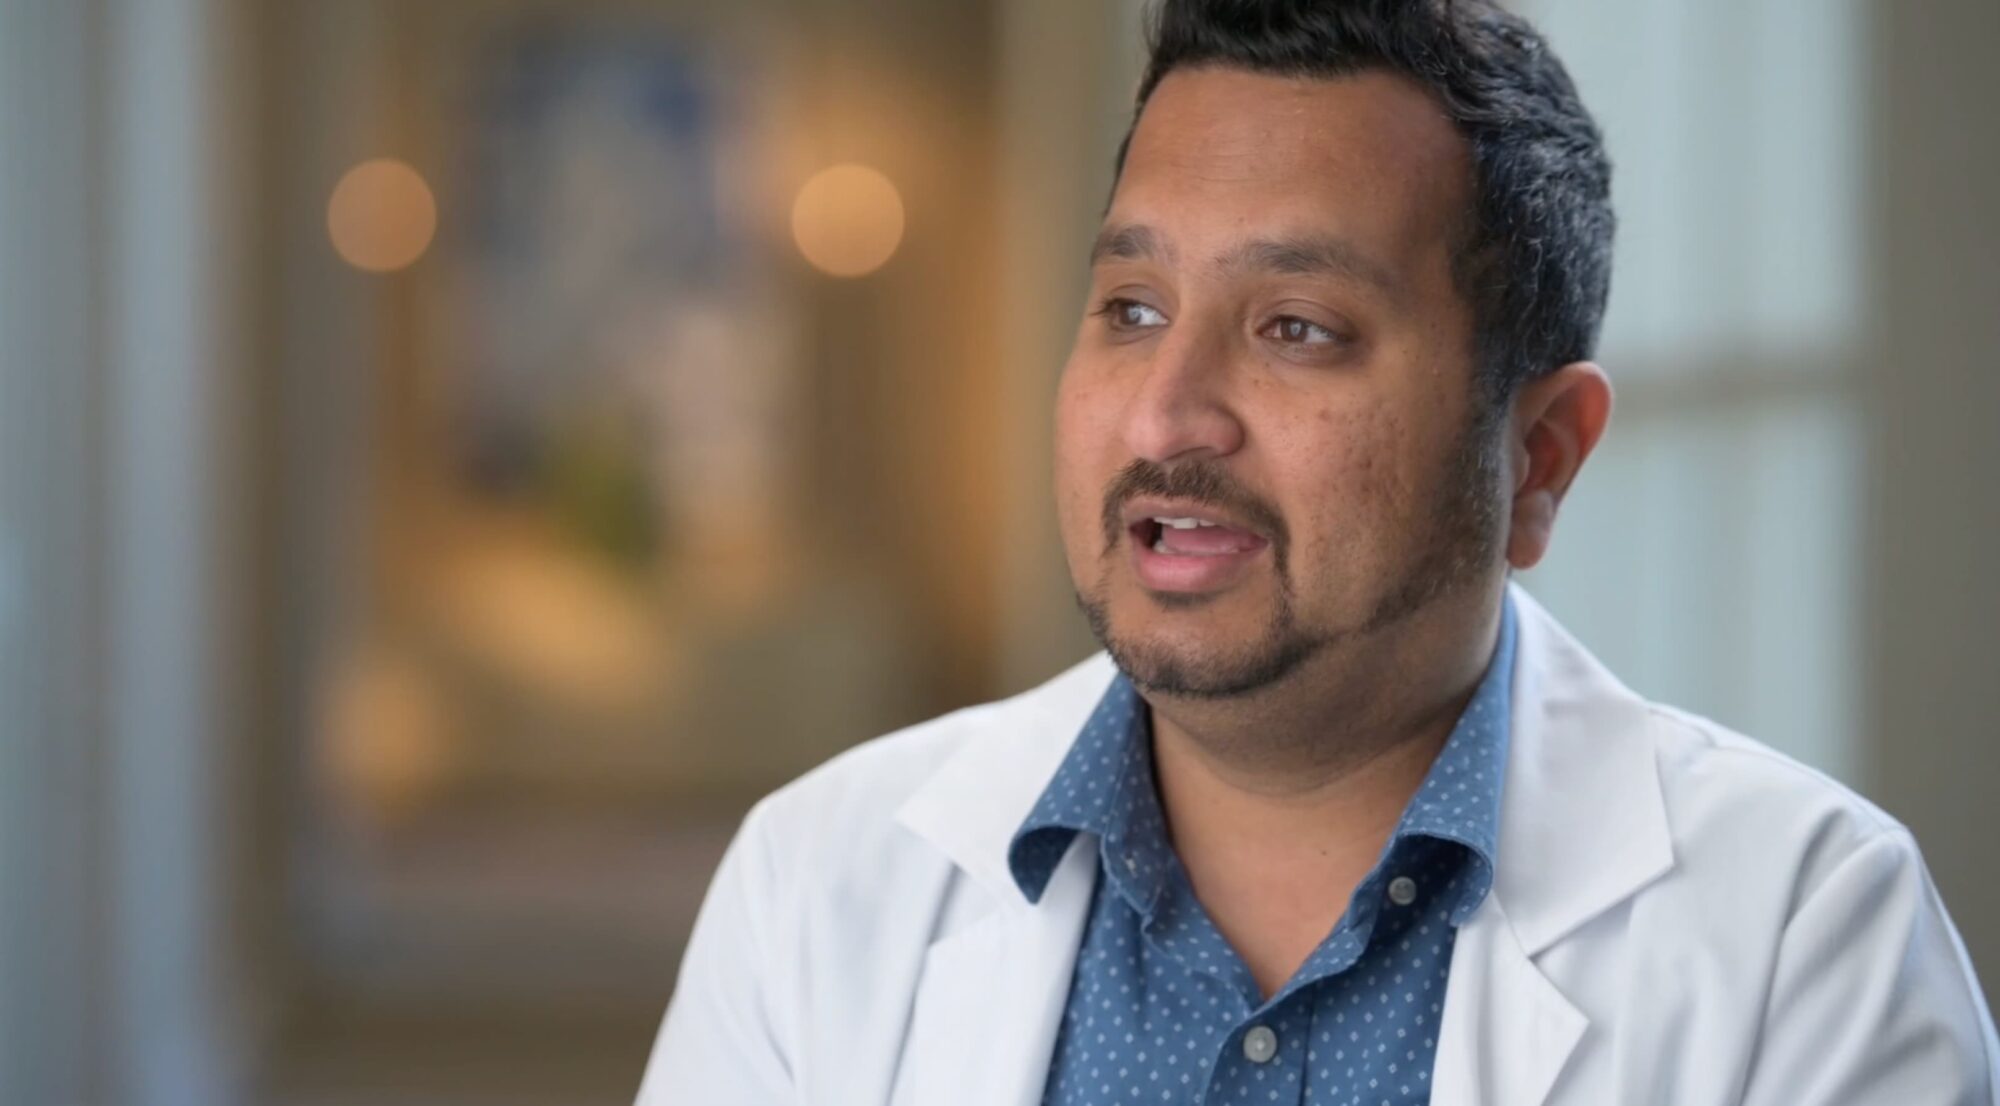 Gurneet Kohli, MD of Premier Family Physicians in Austin, Texas discusses how partnering with agilon resulted in better health outcomes and reduced costs for his diabetes patients.